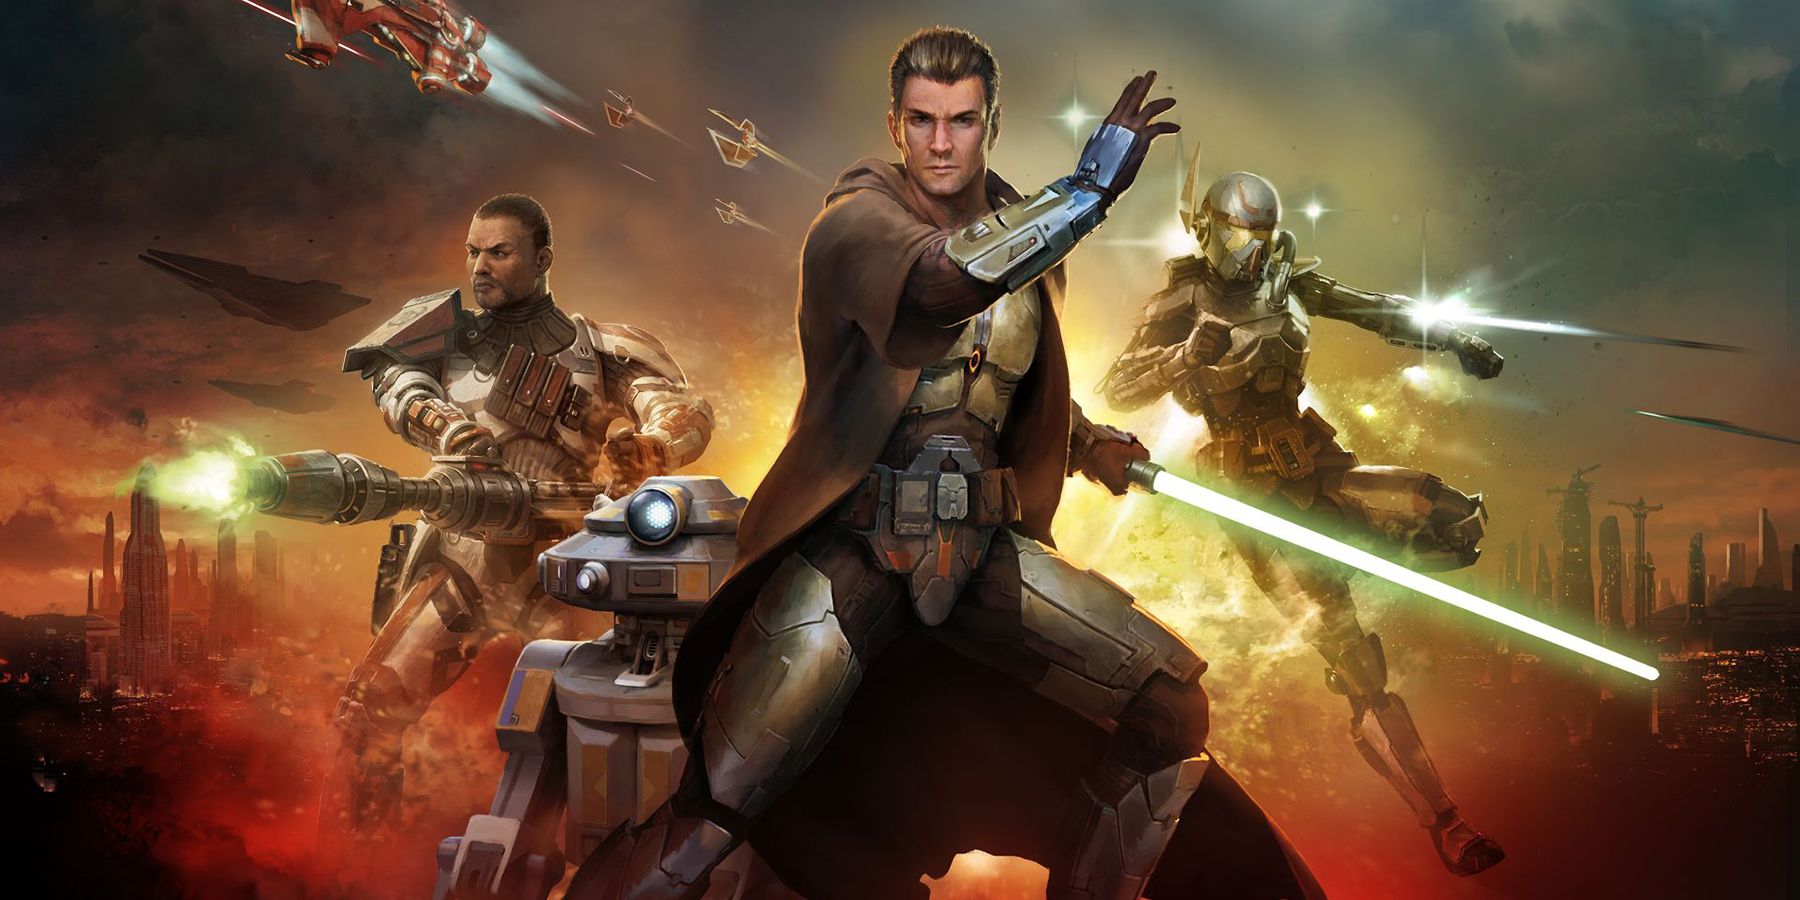 10 Possibilities For Disneys New Star Wars Trilogy